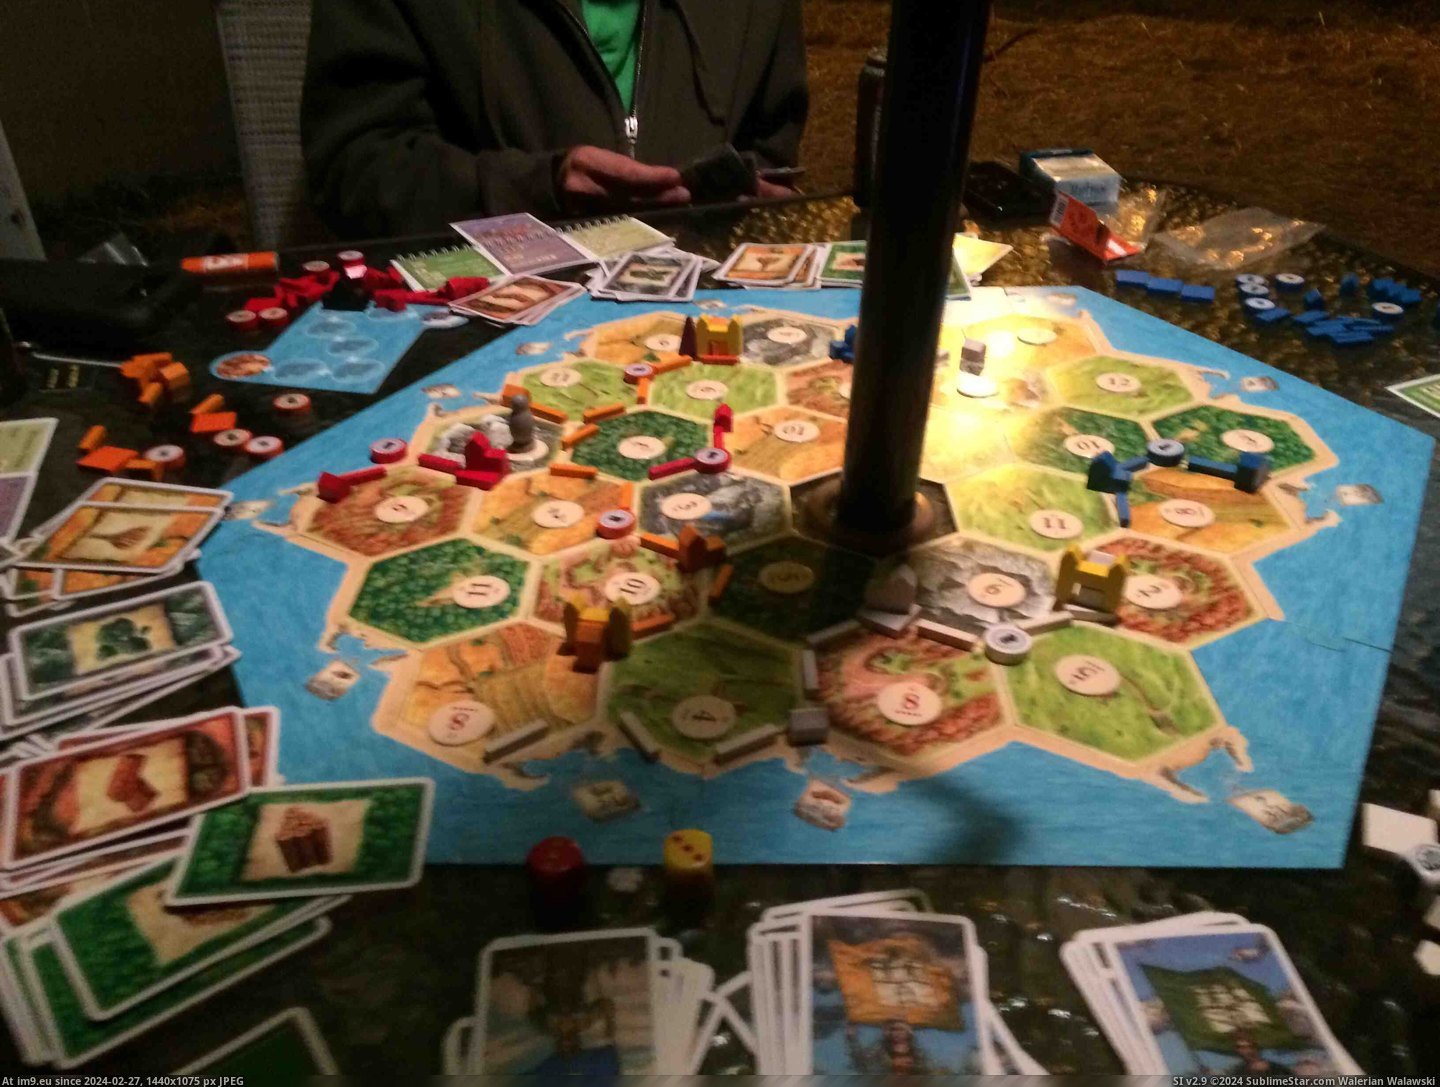 #Gaming #One #Night #Patio #Tables #Settlers #Catan #Played #Center #Umbrella [Gaming] we played settlers of catan outside last night on one of those patio tables with an umbrella in the center Pic. (Bild von album My r/GAMING favs))